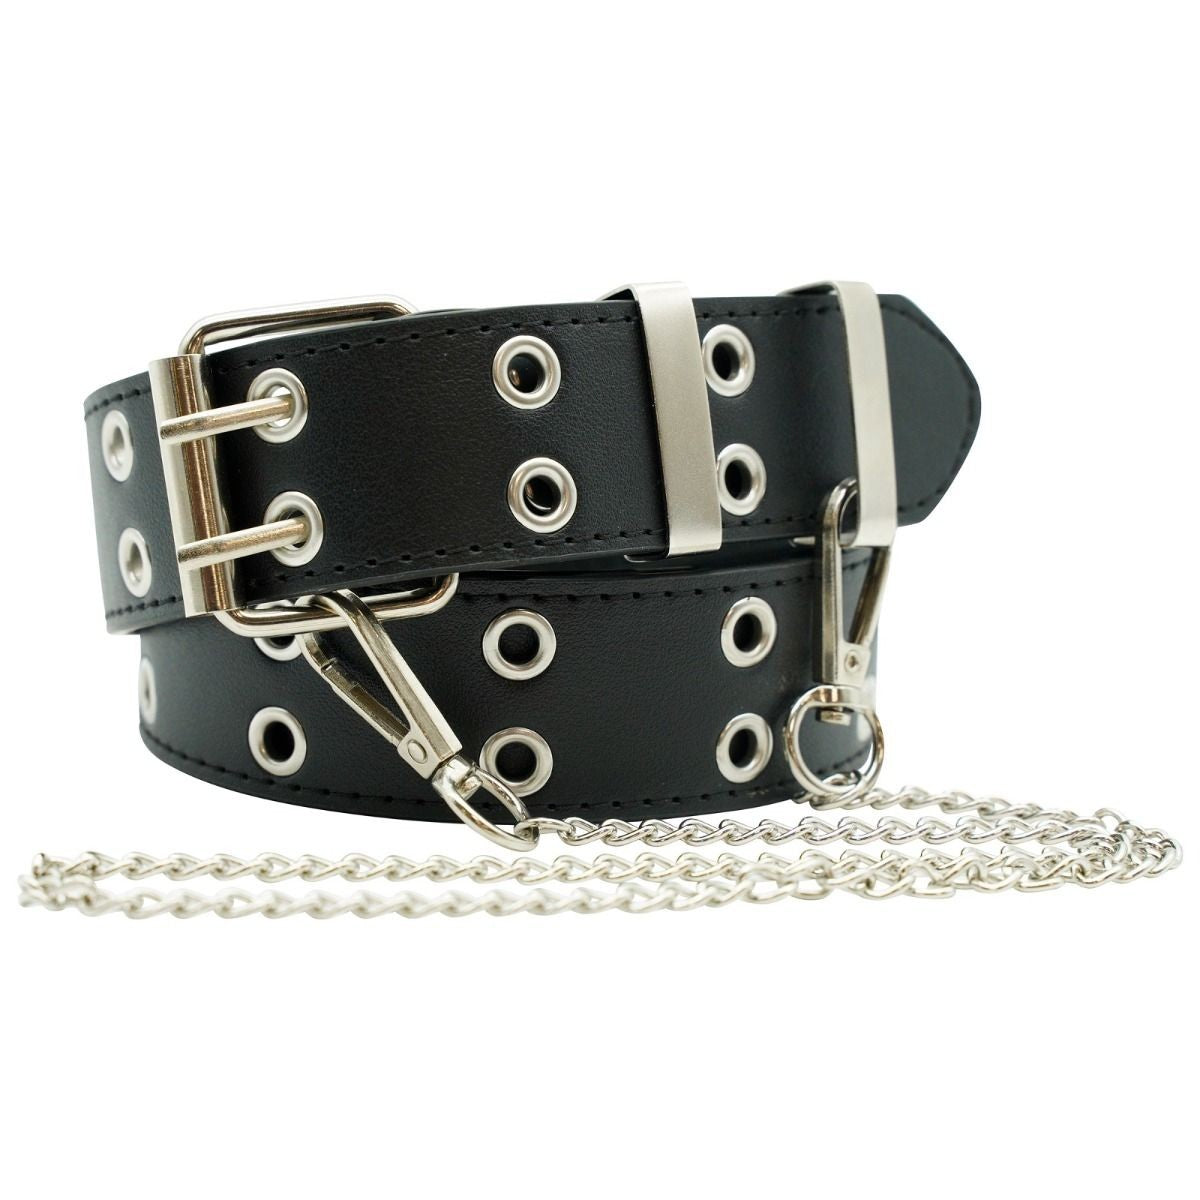 Ro Rox Rudie Double Eyelet PU Belt with Square Buckle & Chain